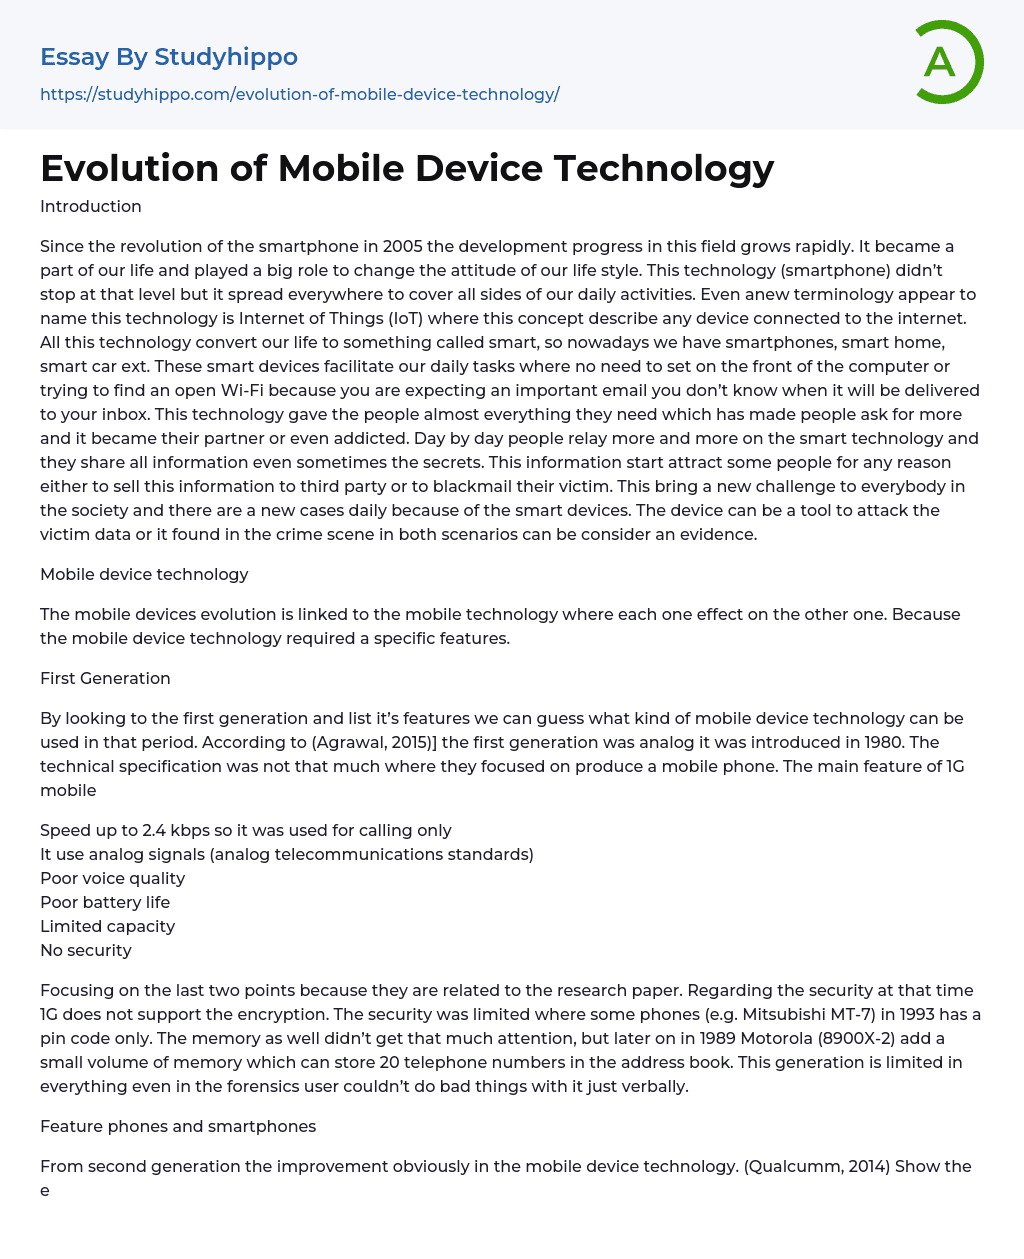 Evolution of Mobile Device Technology Essay Example